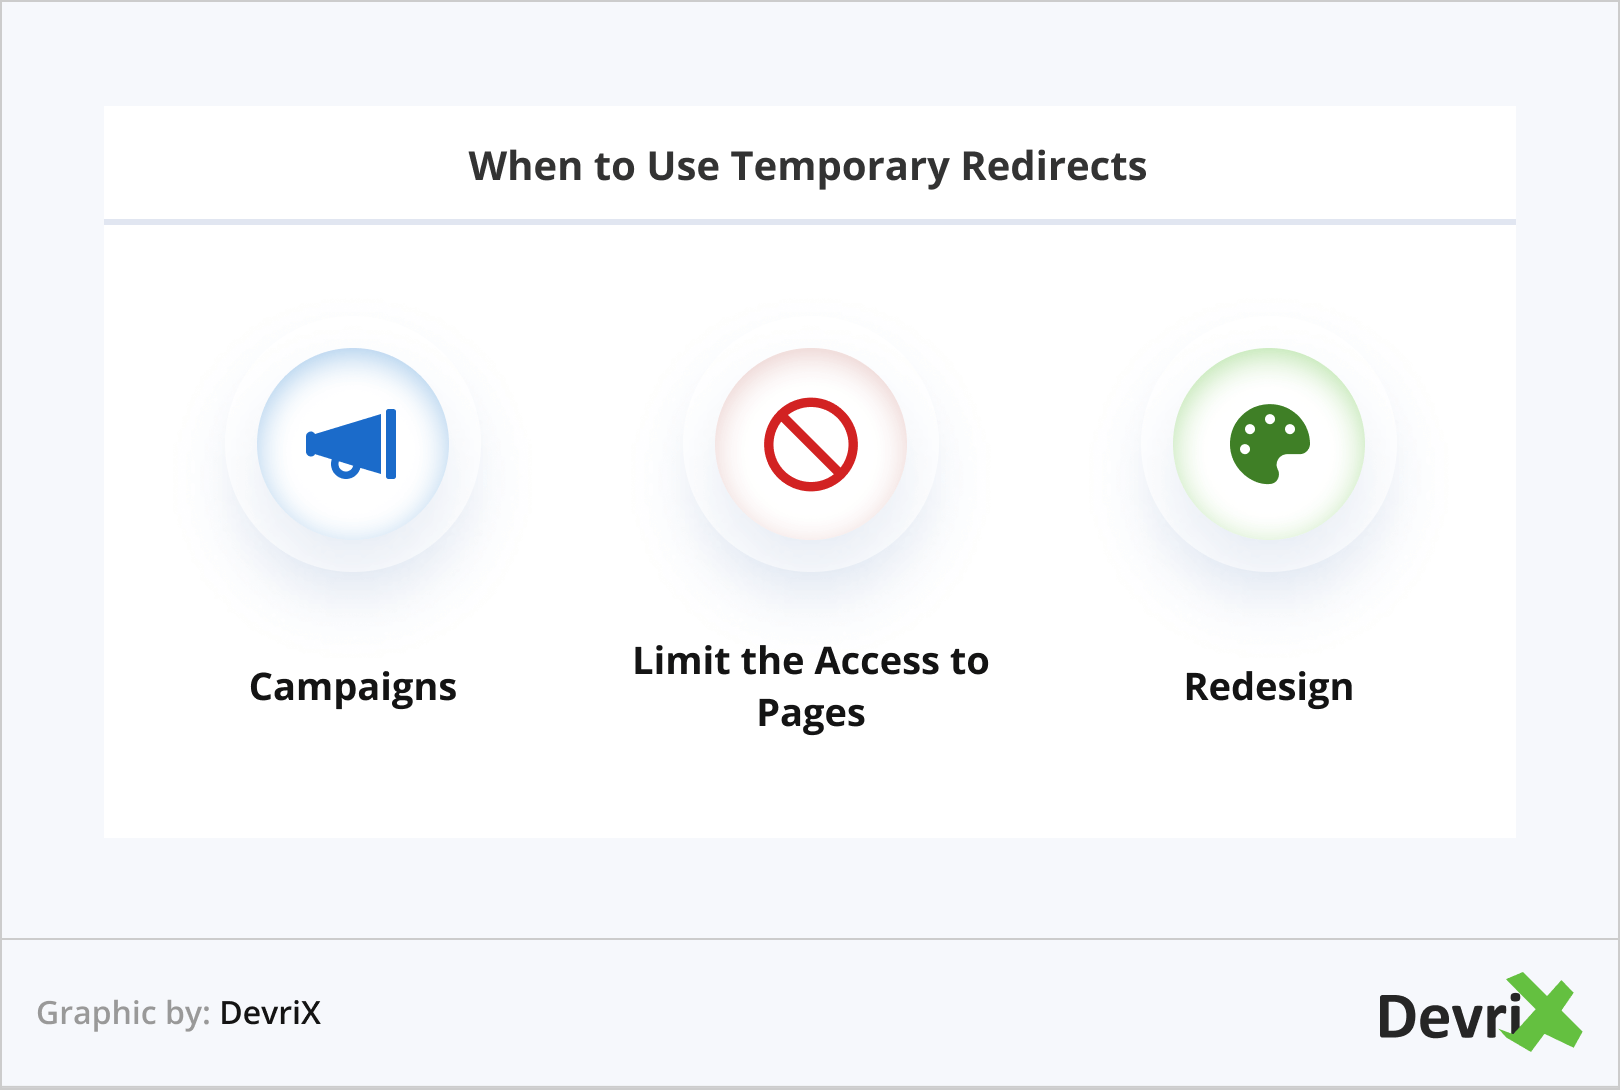 When to Use Temporary Redirects